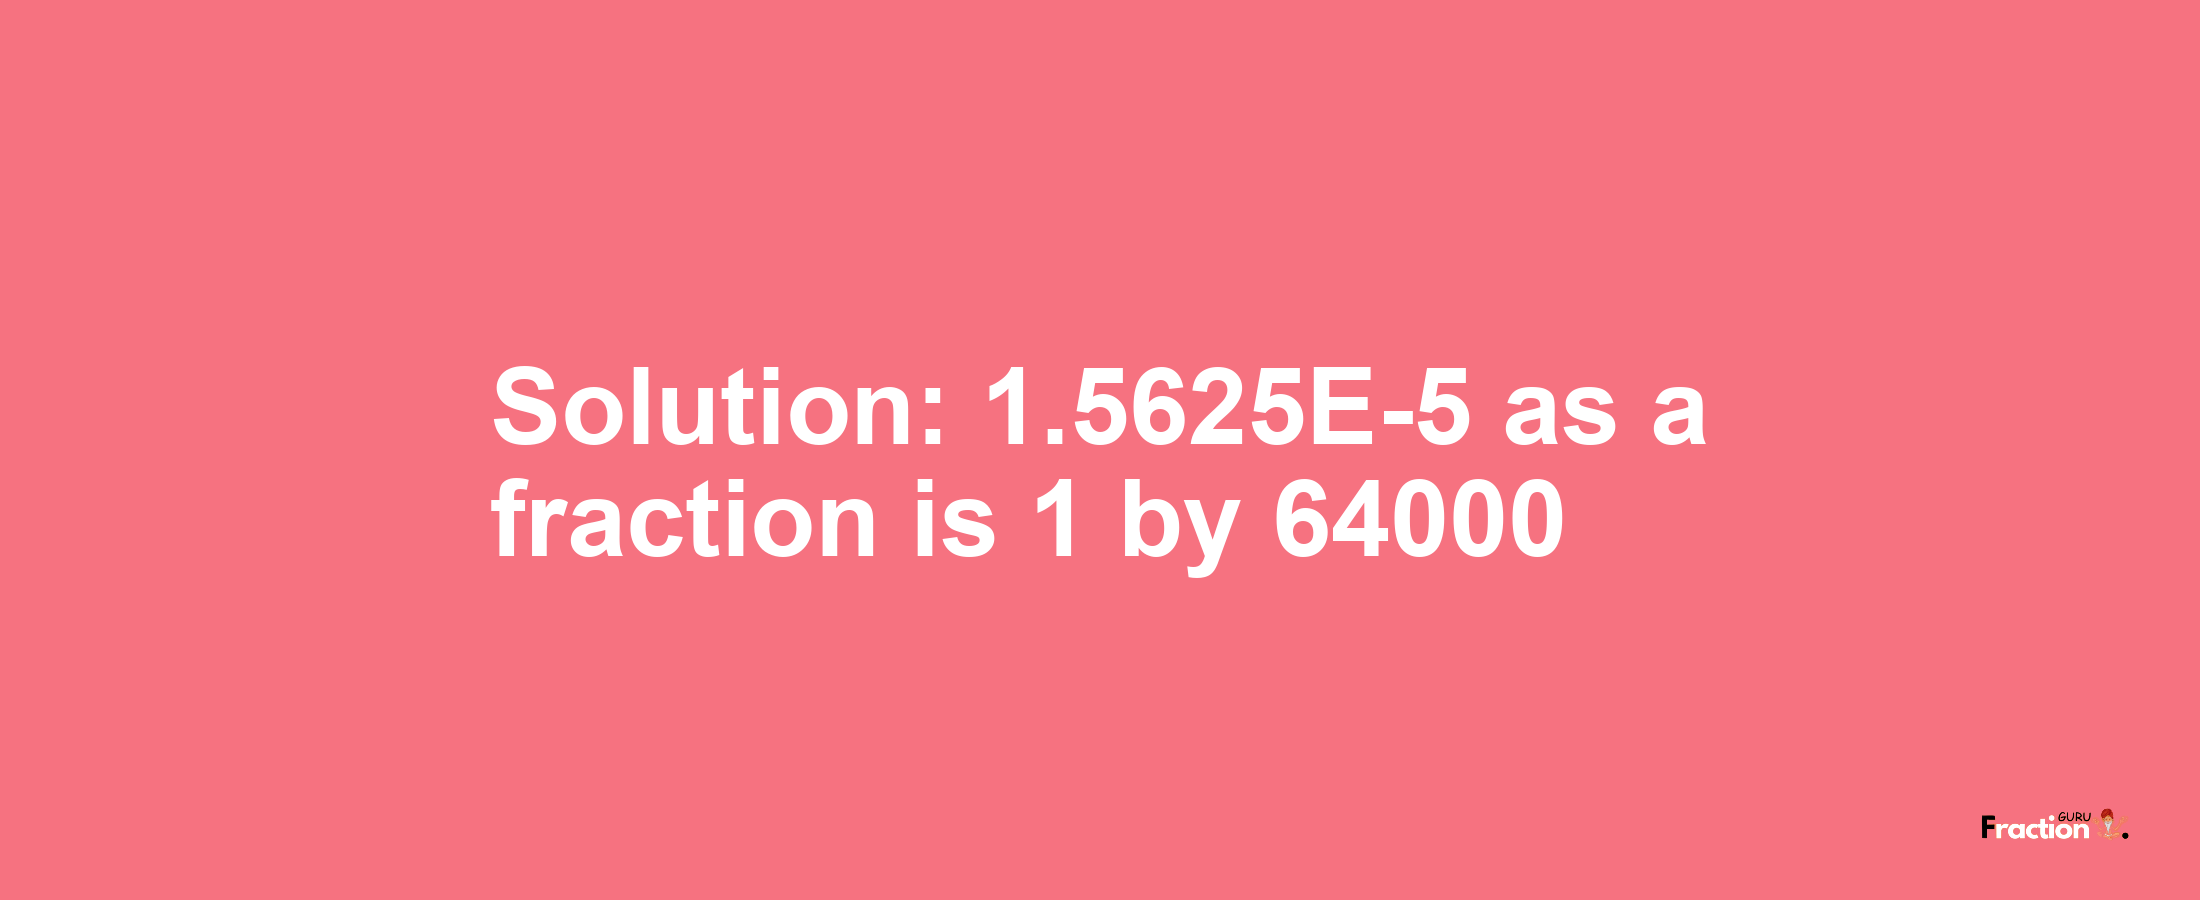 Solution:1.5625E-5 as a fraction is 1/64000